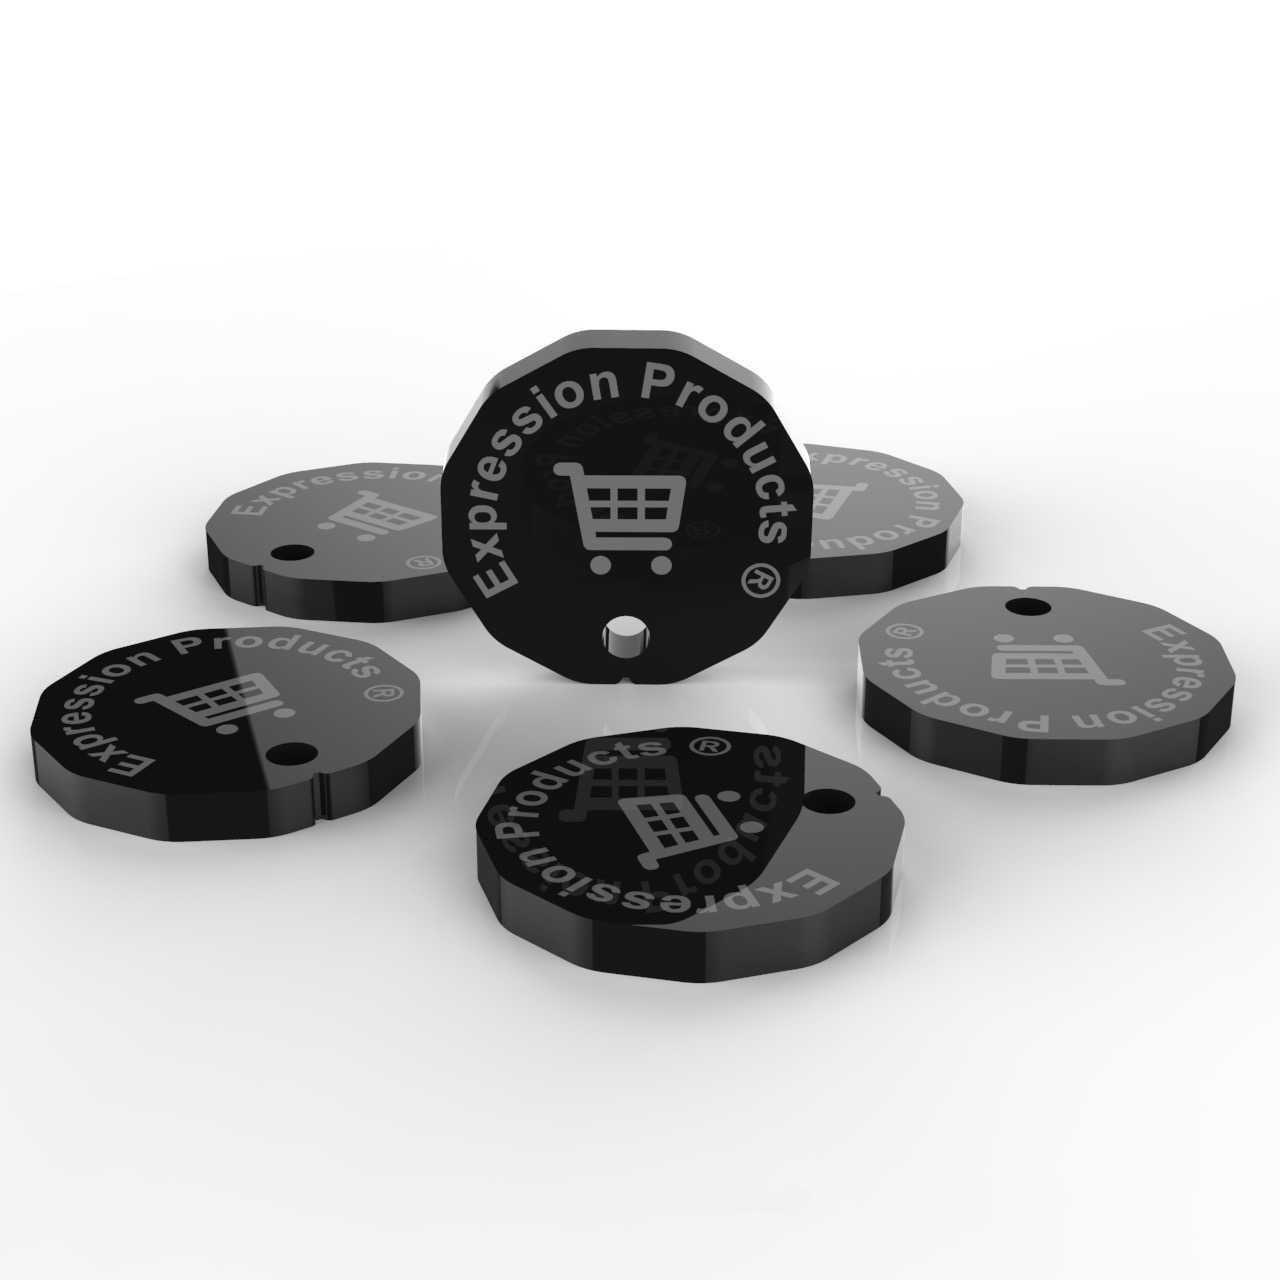 6 - New One Pound Coin £1 Shopping Trolley Token - 12 Sided Acrylic Tokens - Expression Products Ltd